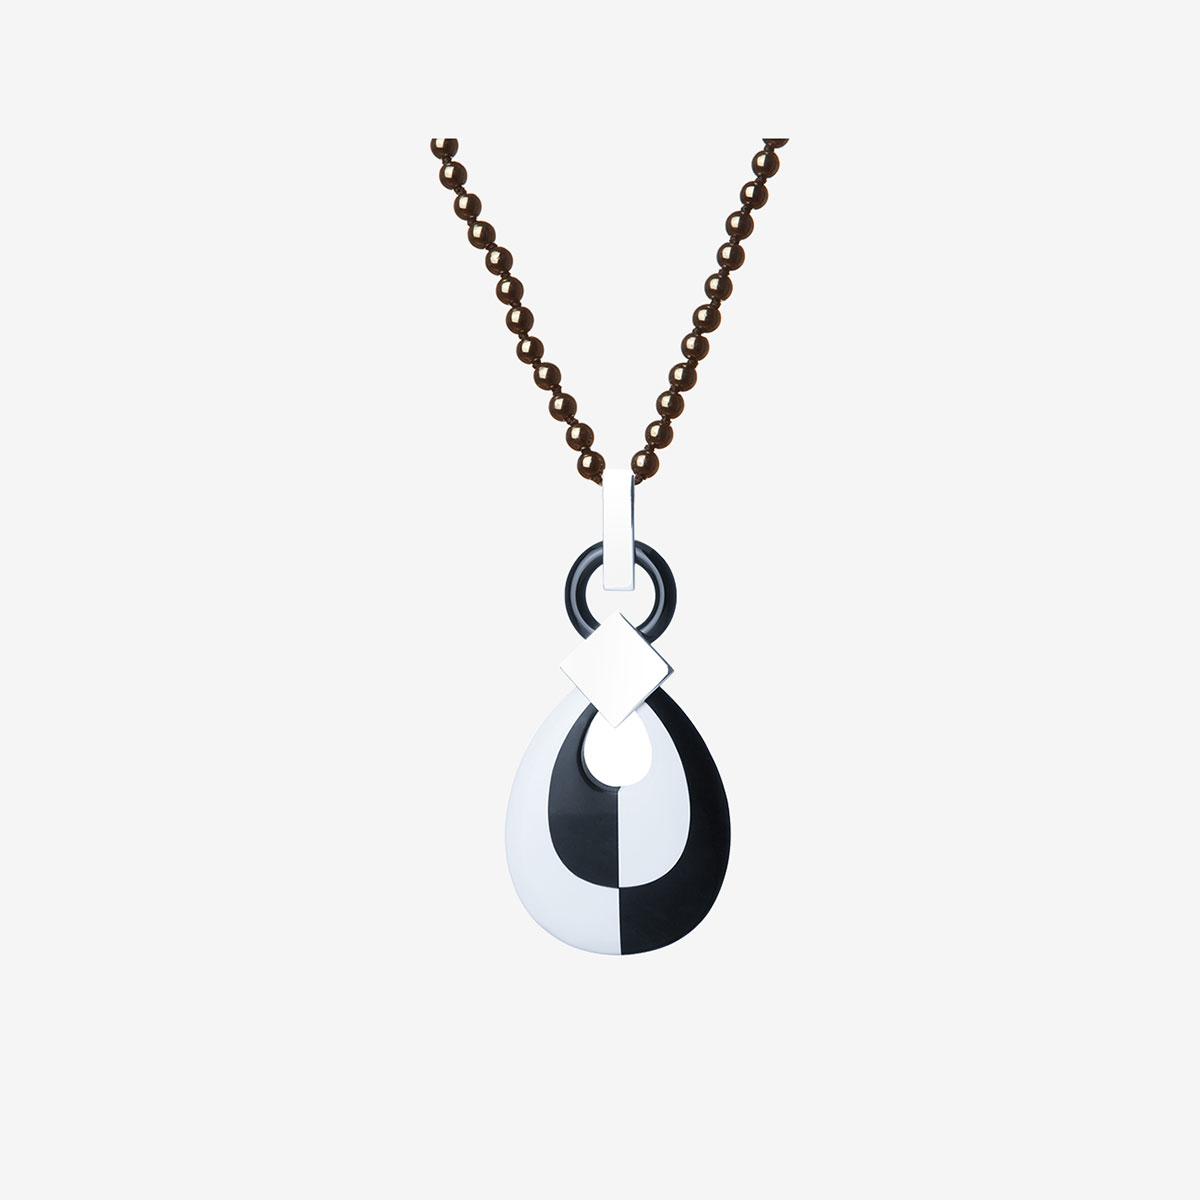 Handmade Dor necklace in sterling silver, onyx and black and white agate mosaic designed by Belen